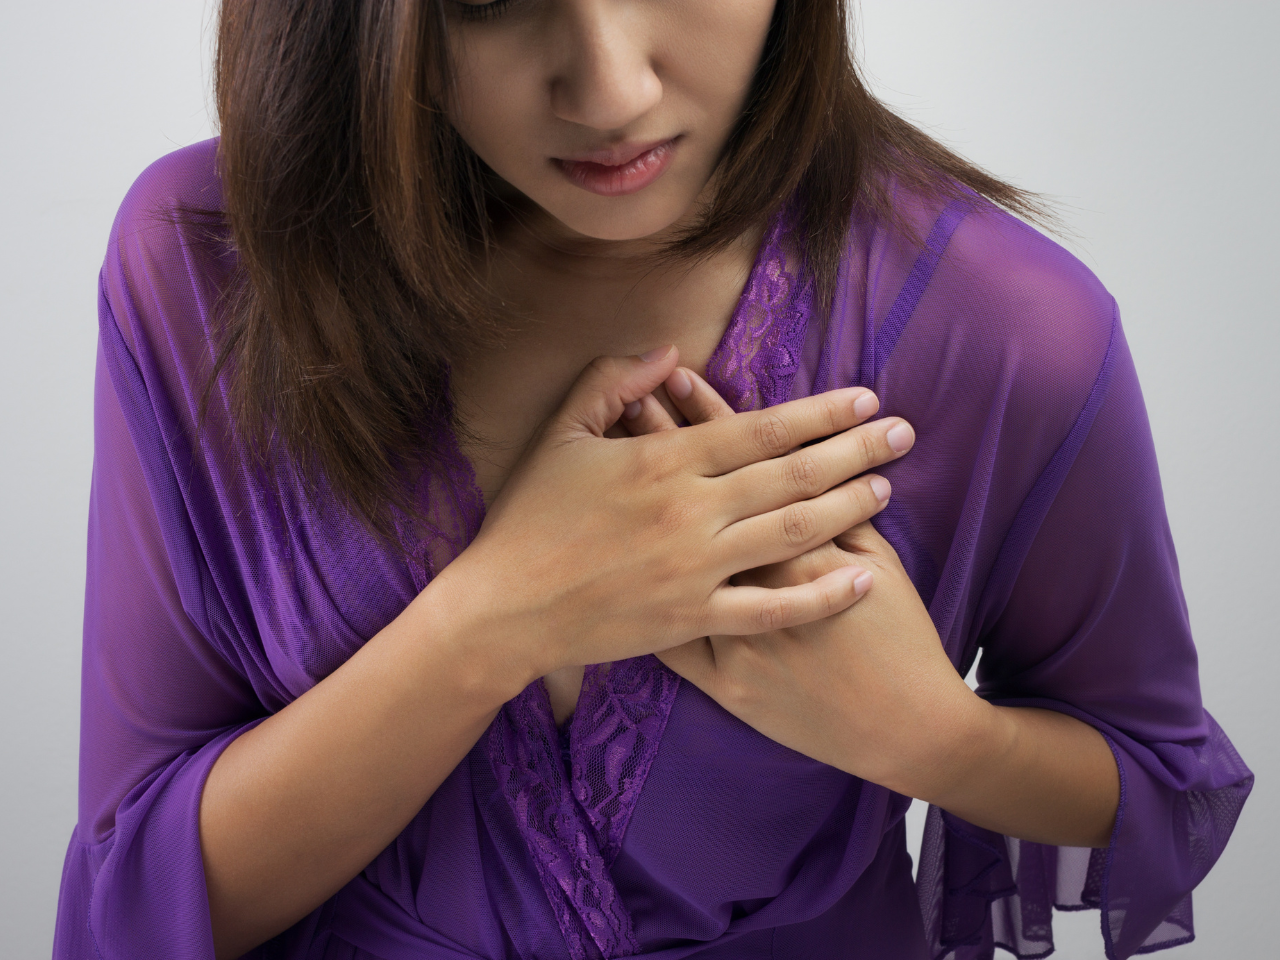 Woman dressed in purple shirt clutching chest due to chest pain